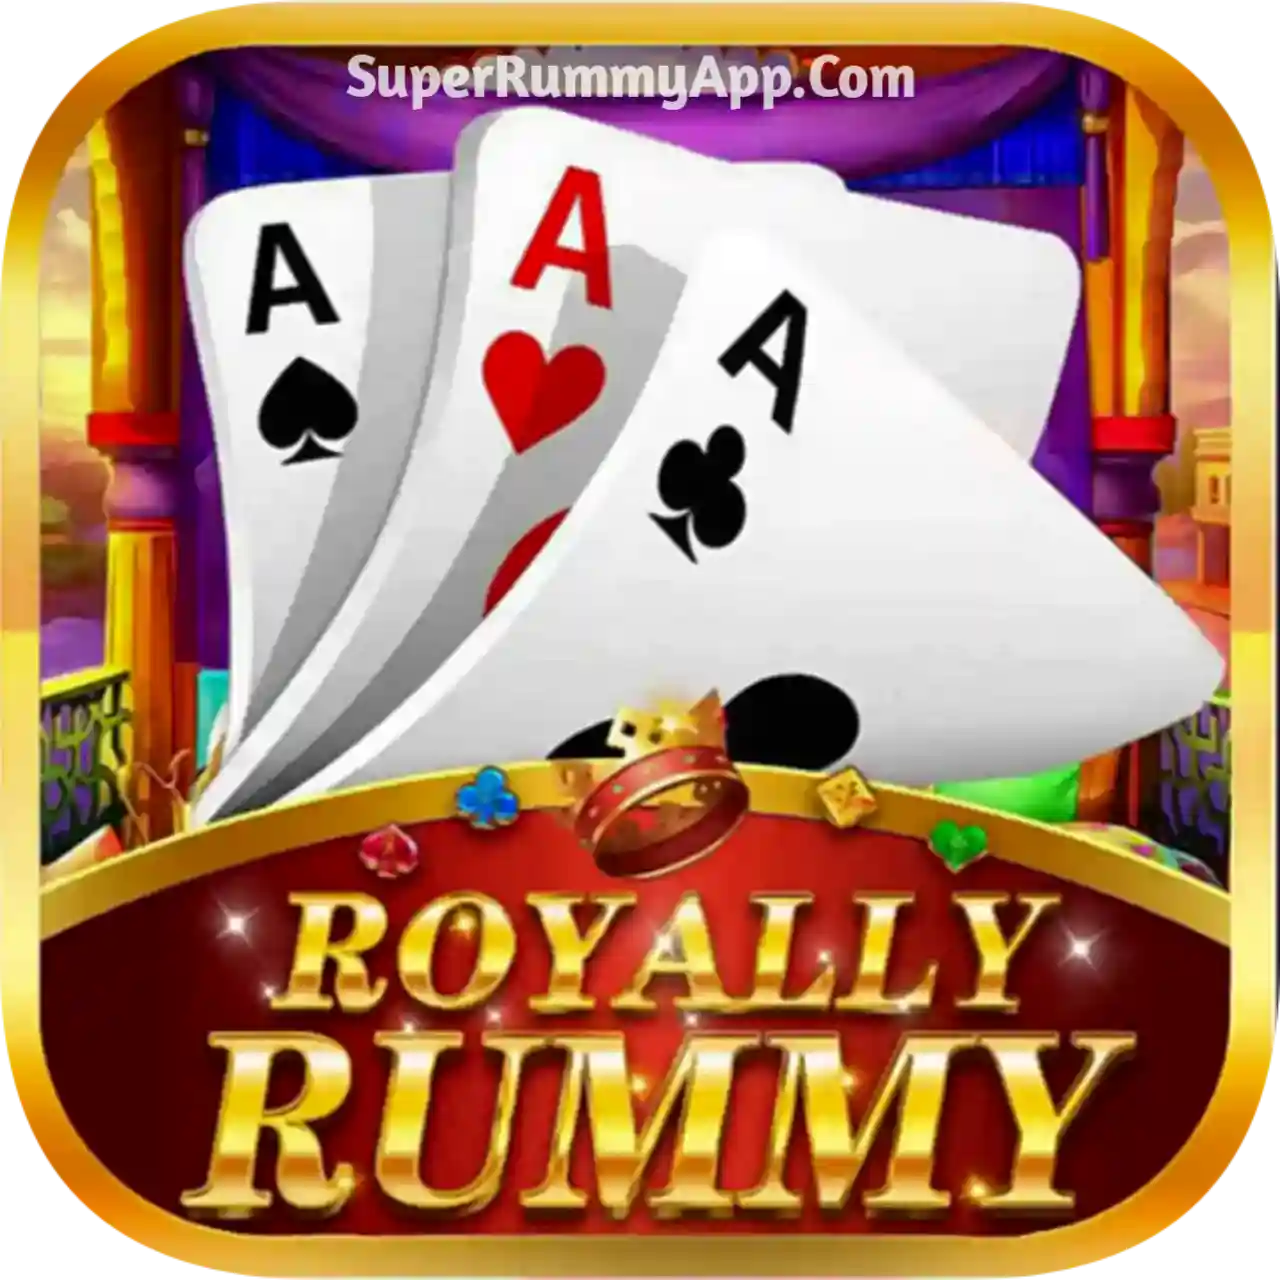 Royally Rummy App Download All Rummy Apps List - India Rummy App